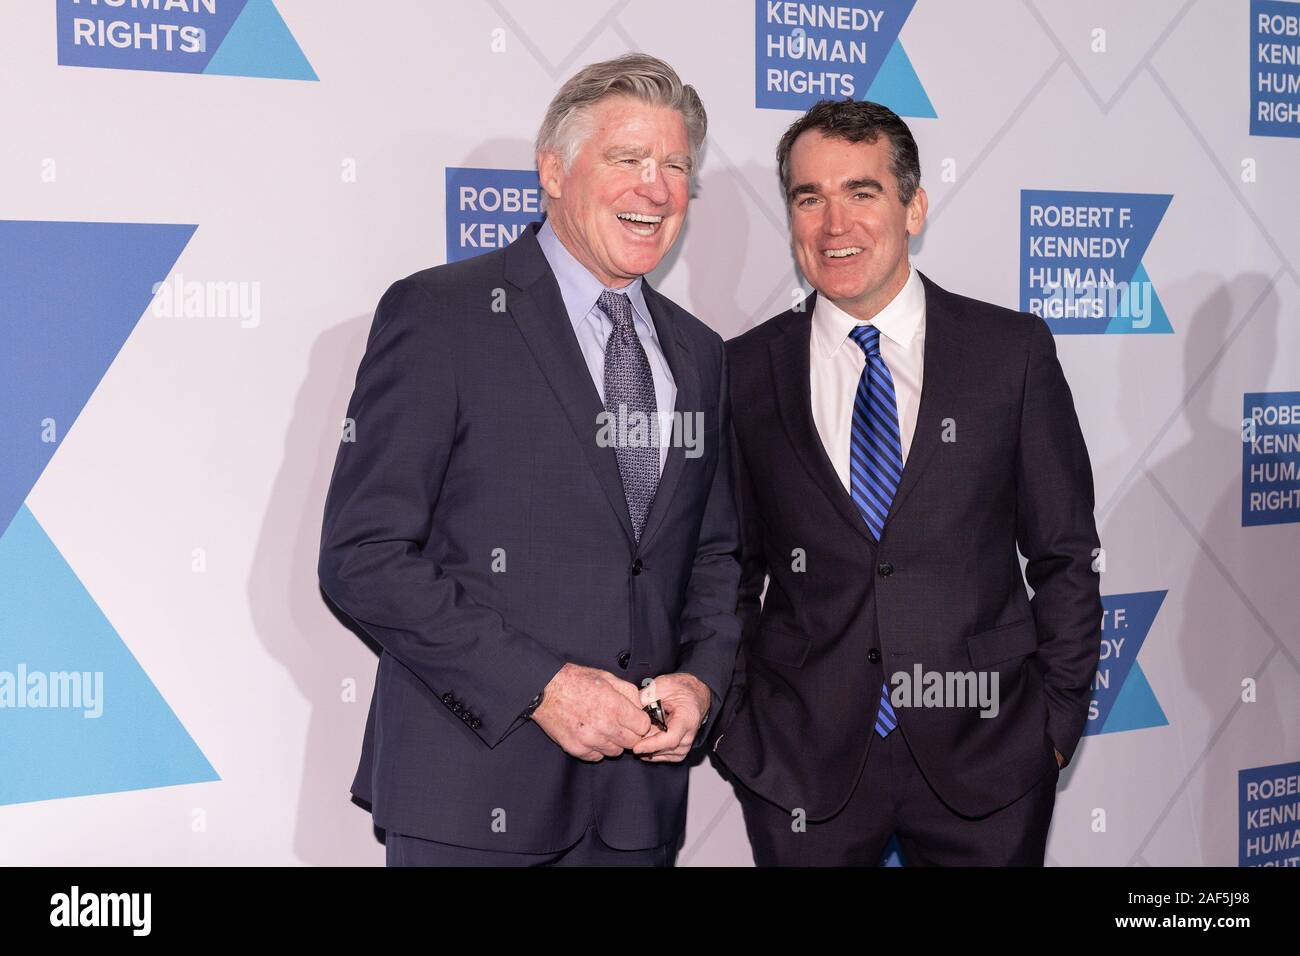 New York, NY, USA. 12th Dec, 2019. Treat Williams, Brian D'Arcy James at arrivals for 51st Annual Robert F. Kennedy Human Rights Ripple of Hope Awards, New York Hilton Midtown, New York, NY December 12, 2019. Credit: Jason Smith/Everett Collection/Alamy Live News Stock Photo